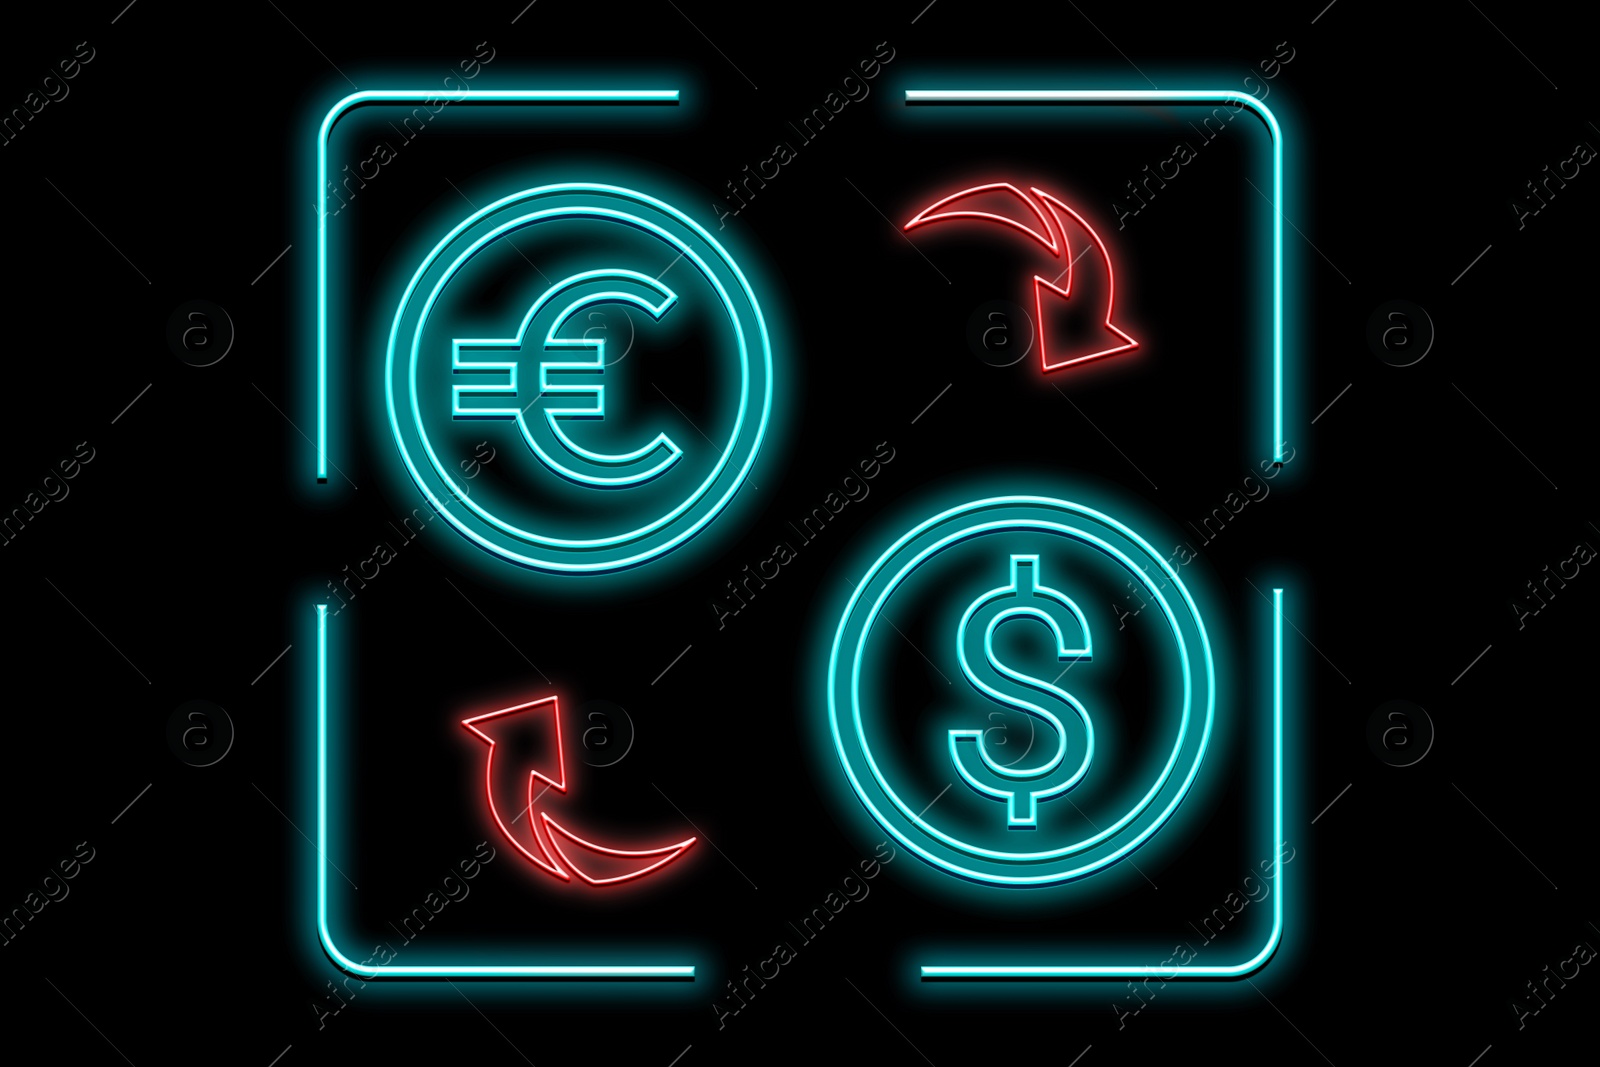 Image of Money exchange neon sign. Red arrows, light blue euro and dollar symbols on black background